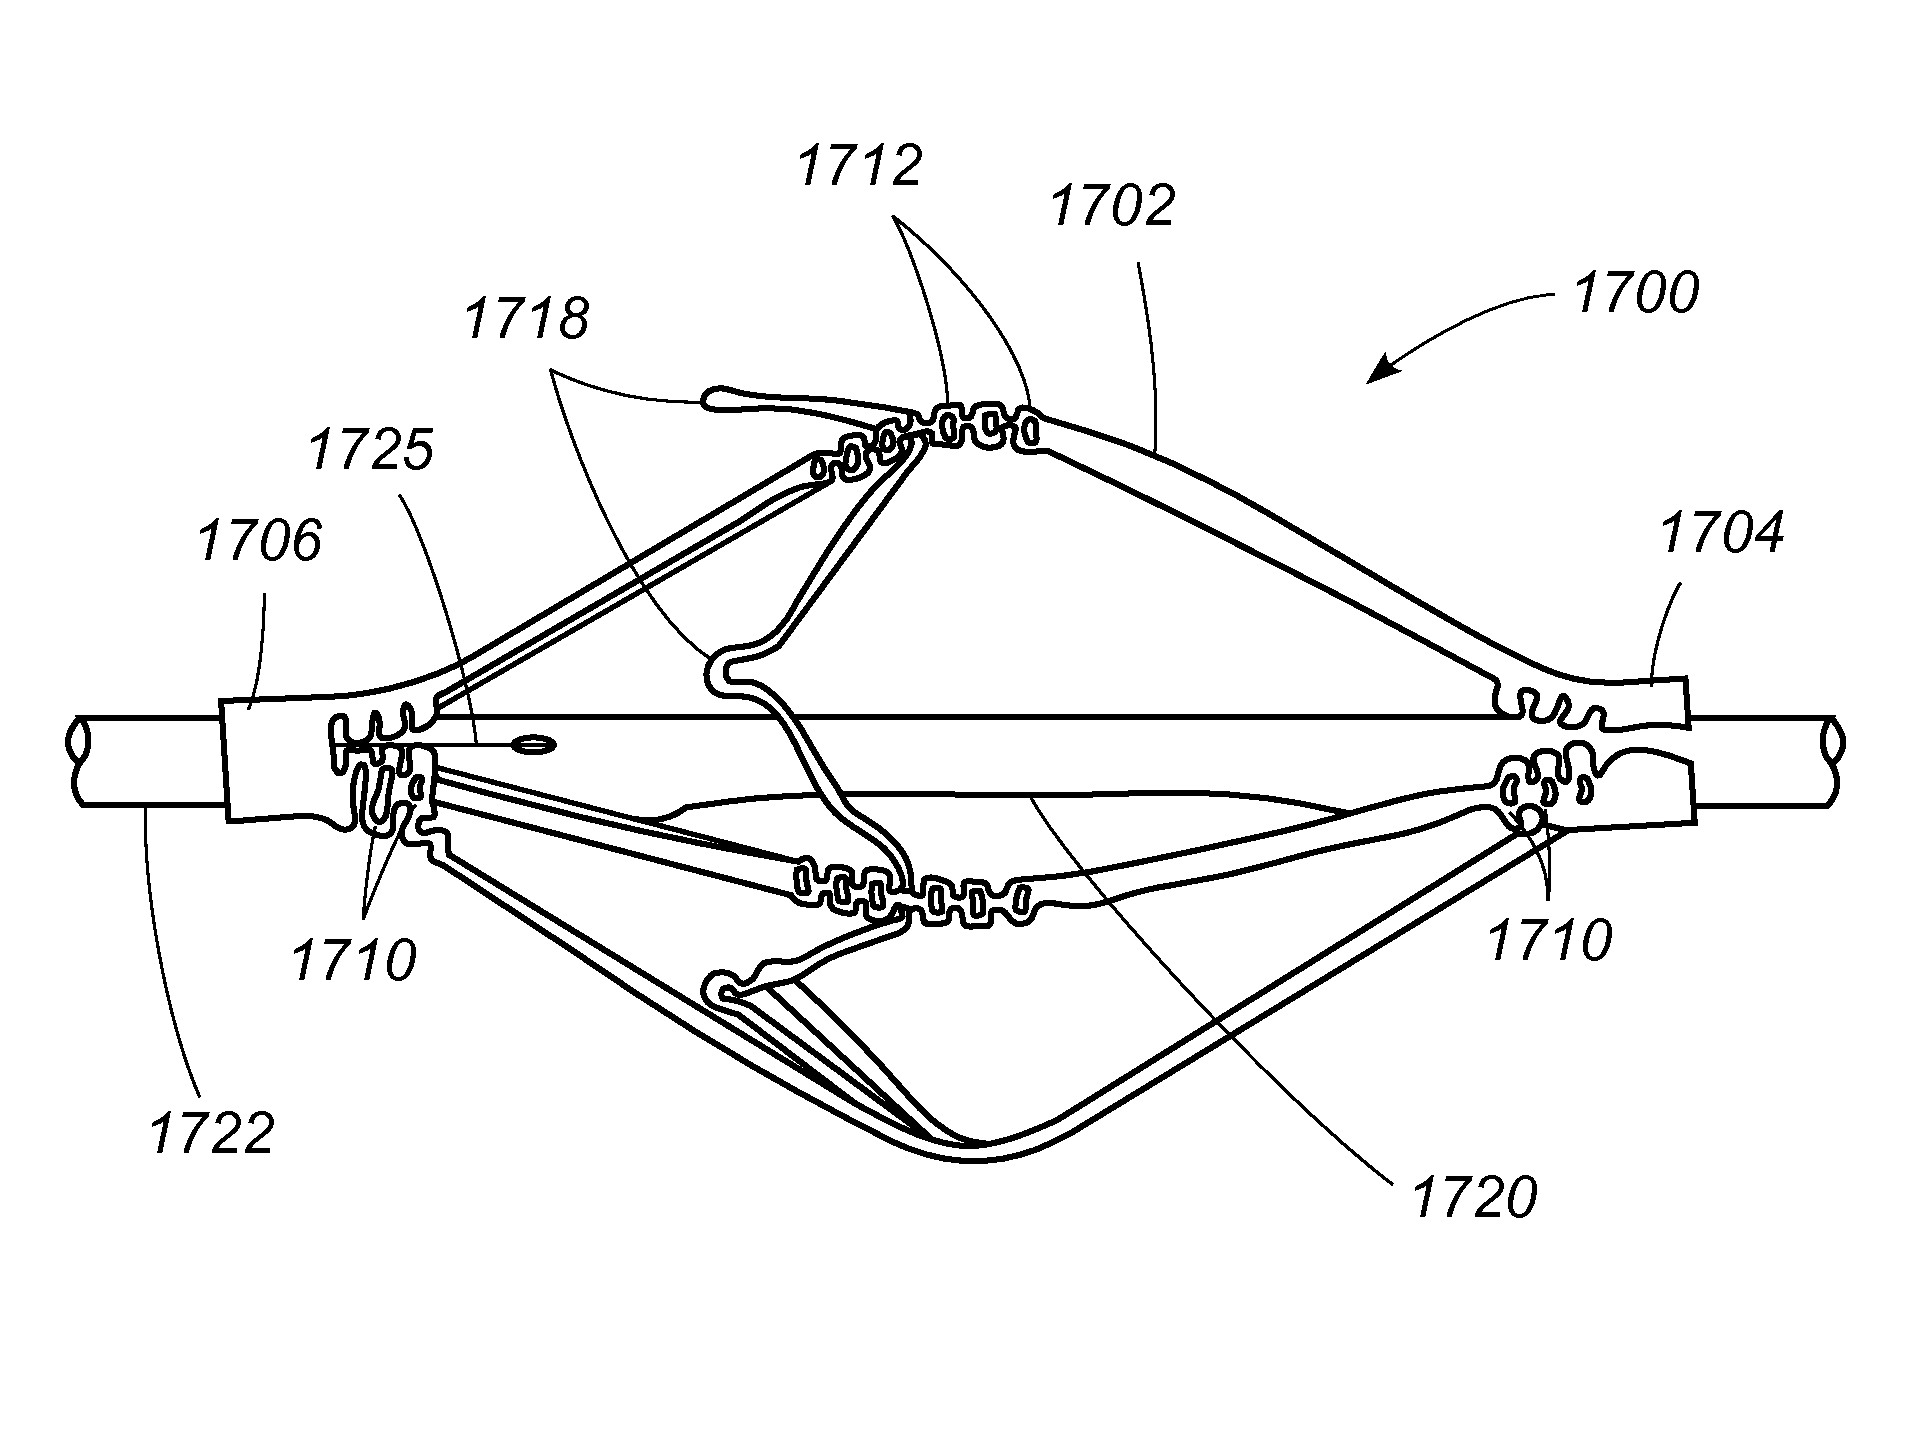 Angioplasty device with embolic filter